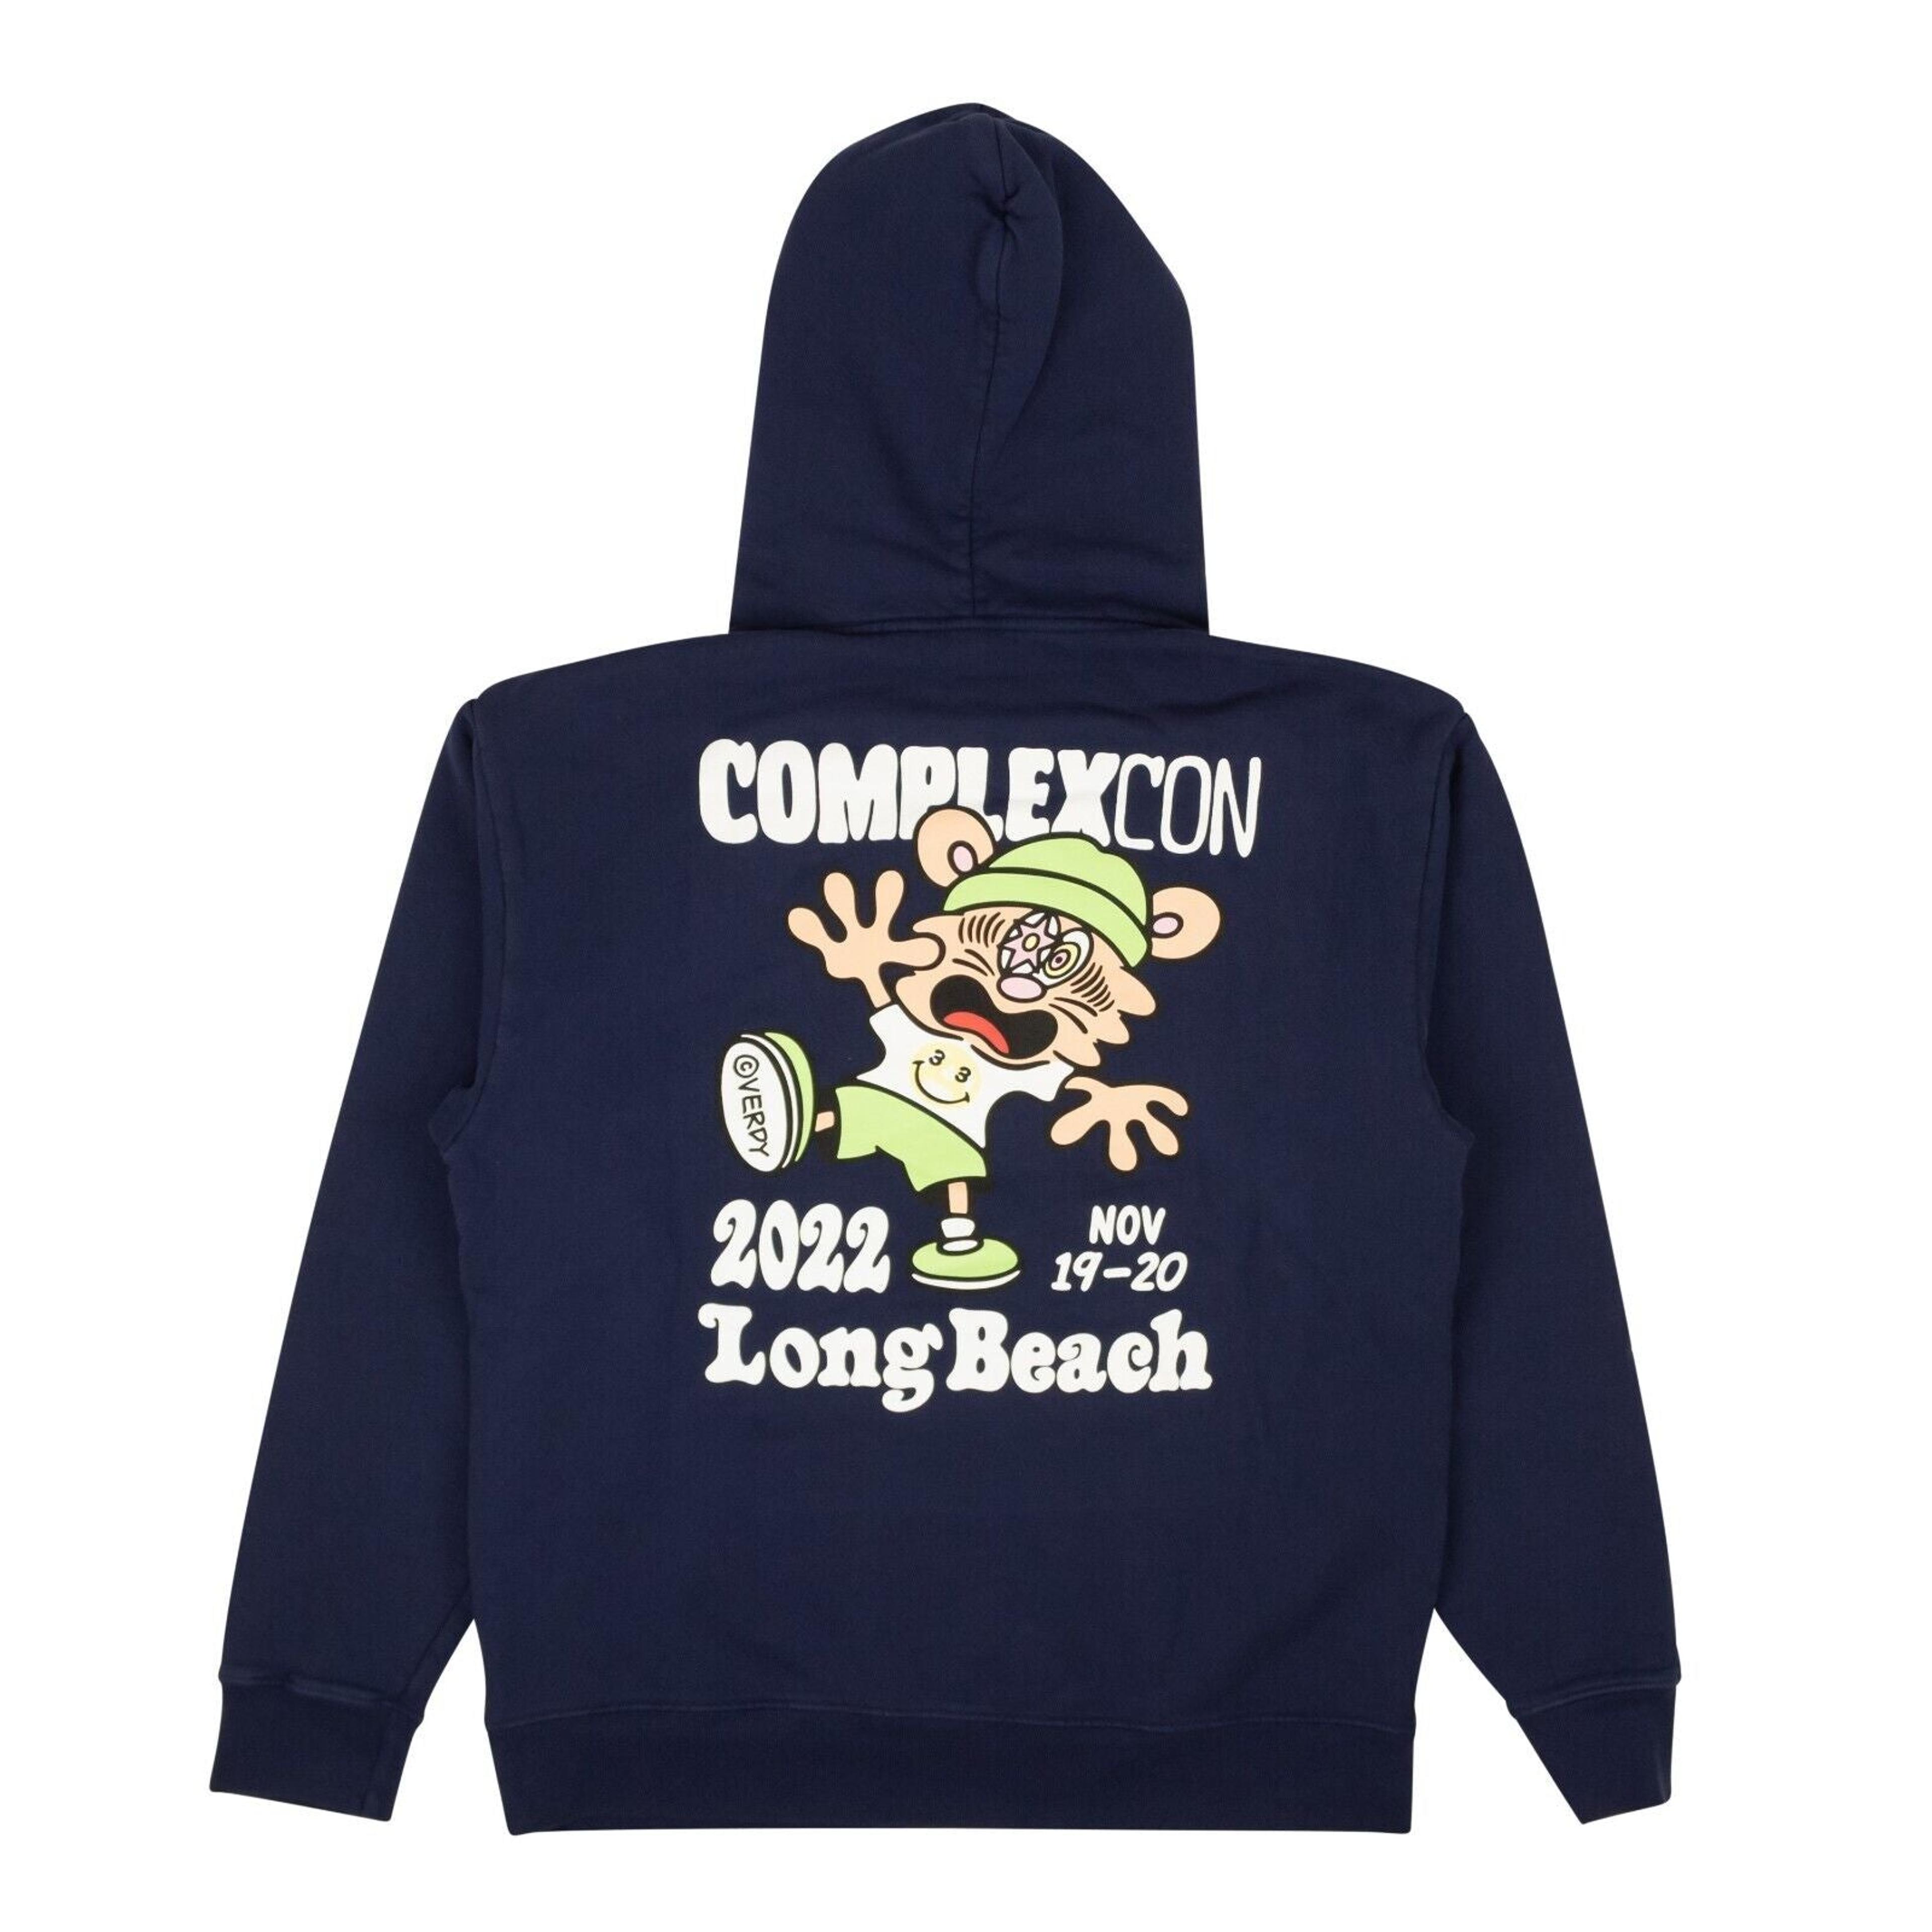 Alternate View 2 of Complexcon X Verdy Hoodie - Navy